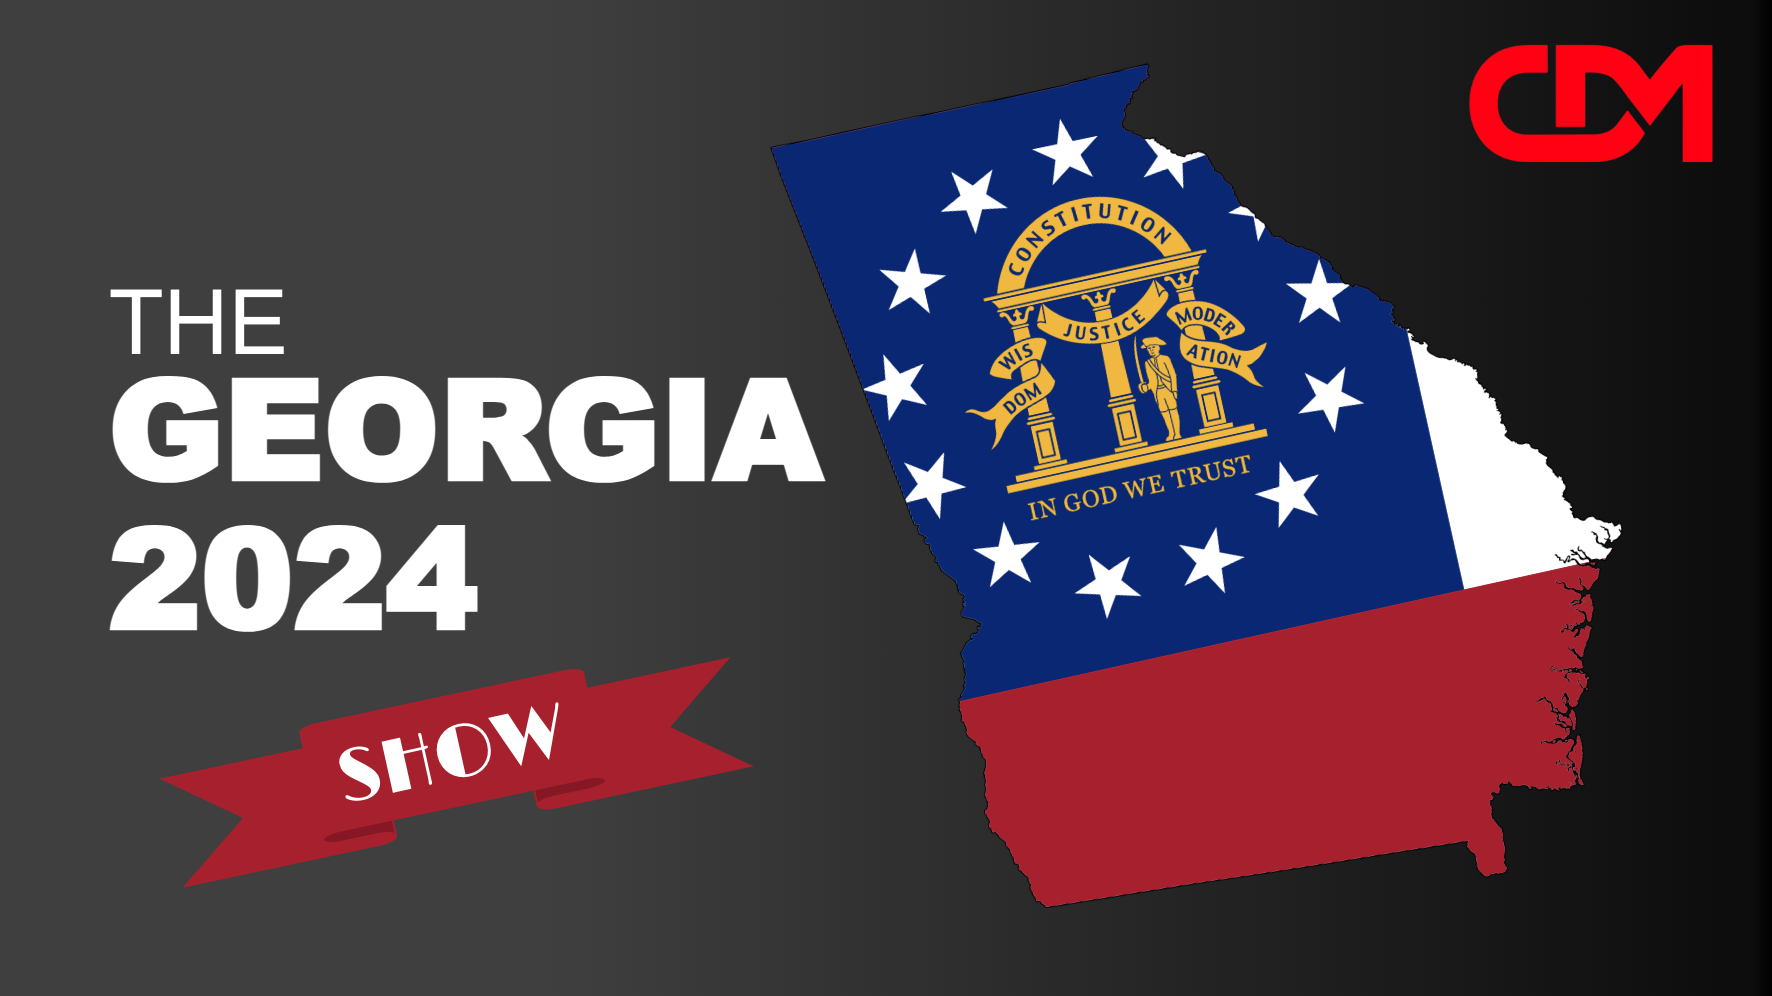 LIVESTREAM REPLAY: The Georgia 2024 Show! Mallory Staples, Dr. Peter McCullough, Nate Cain and Breaking News on Kemp EO